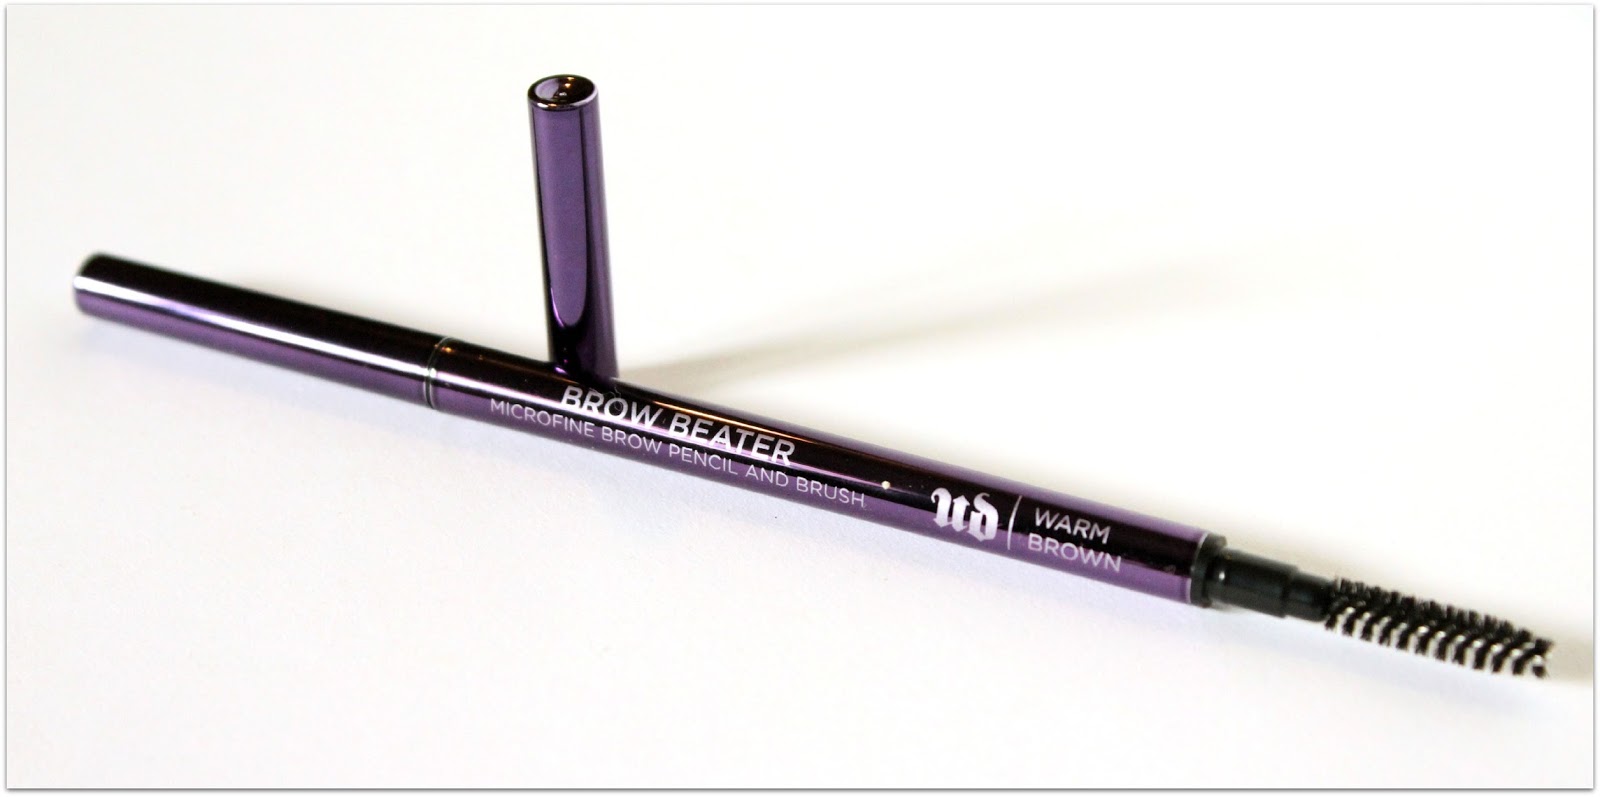 Review: Urban Brow Beater Microfine Brow